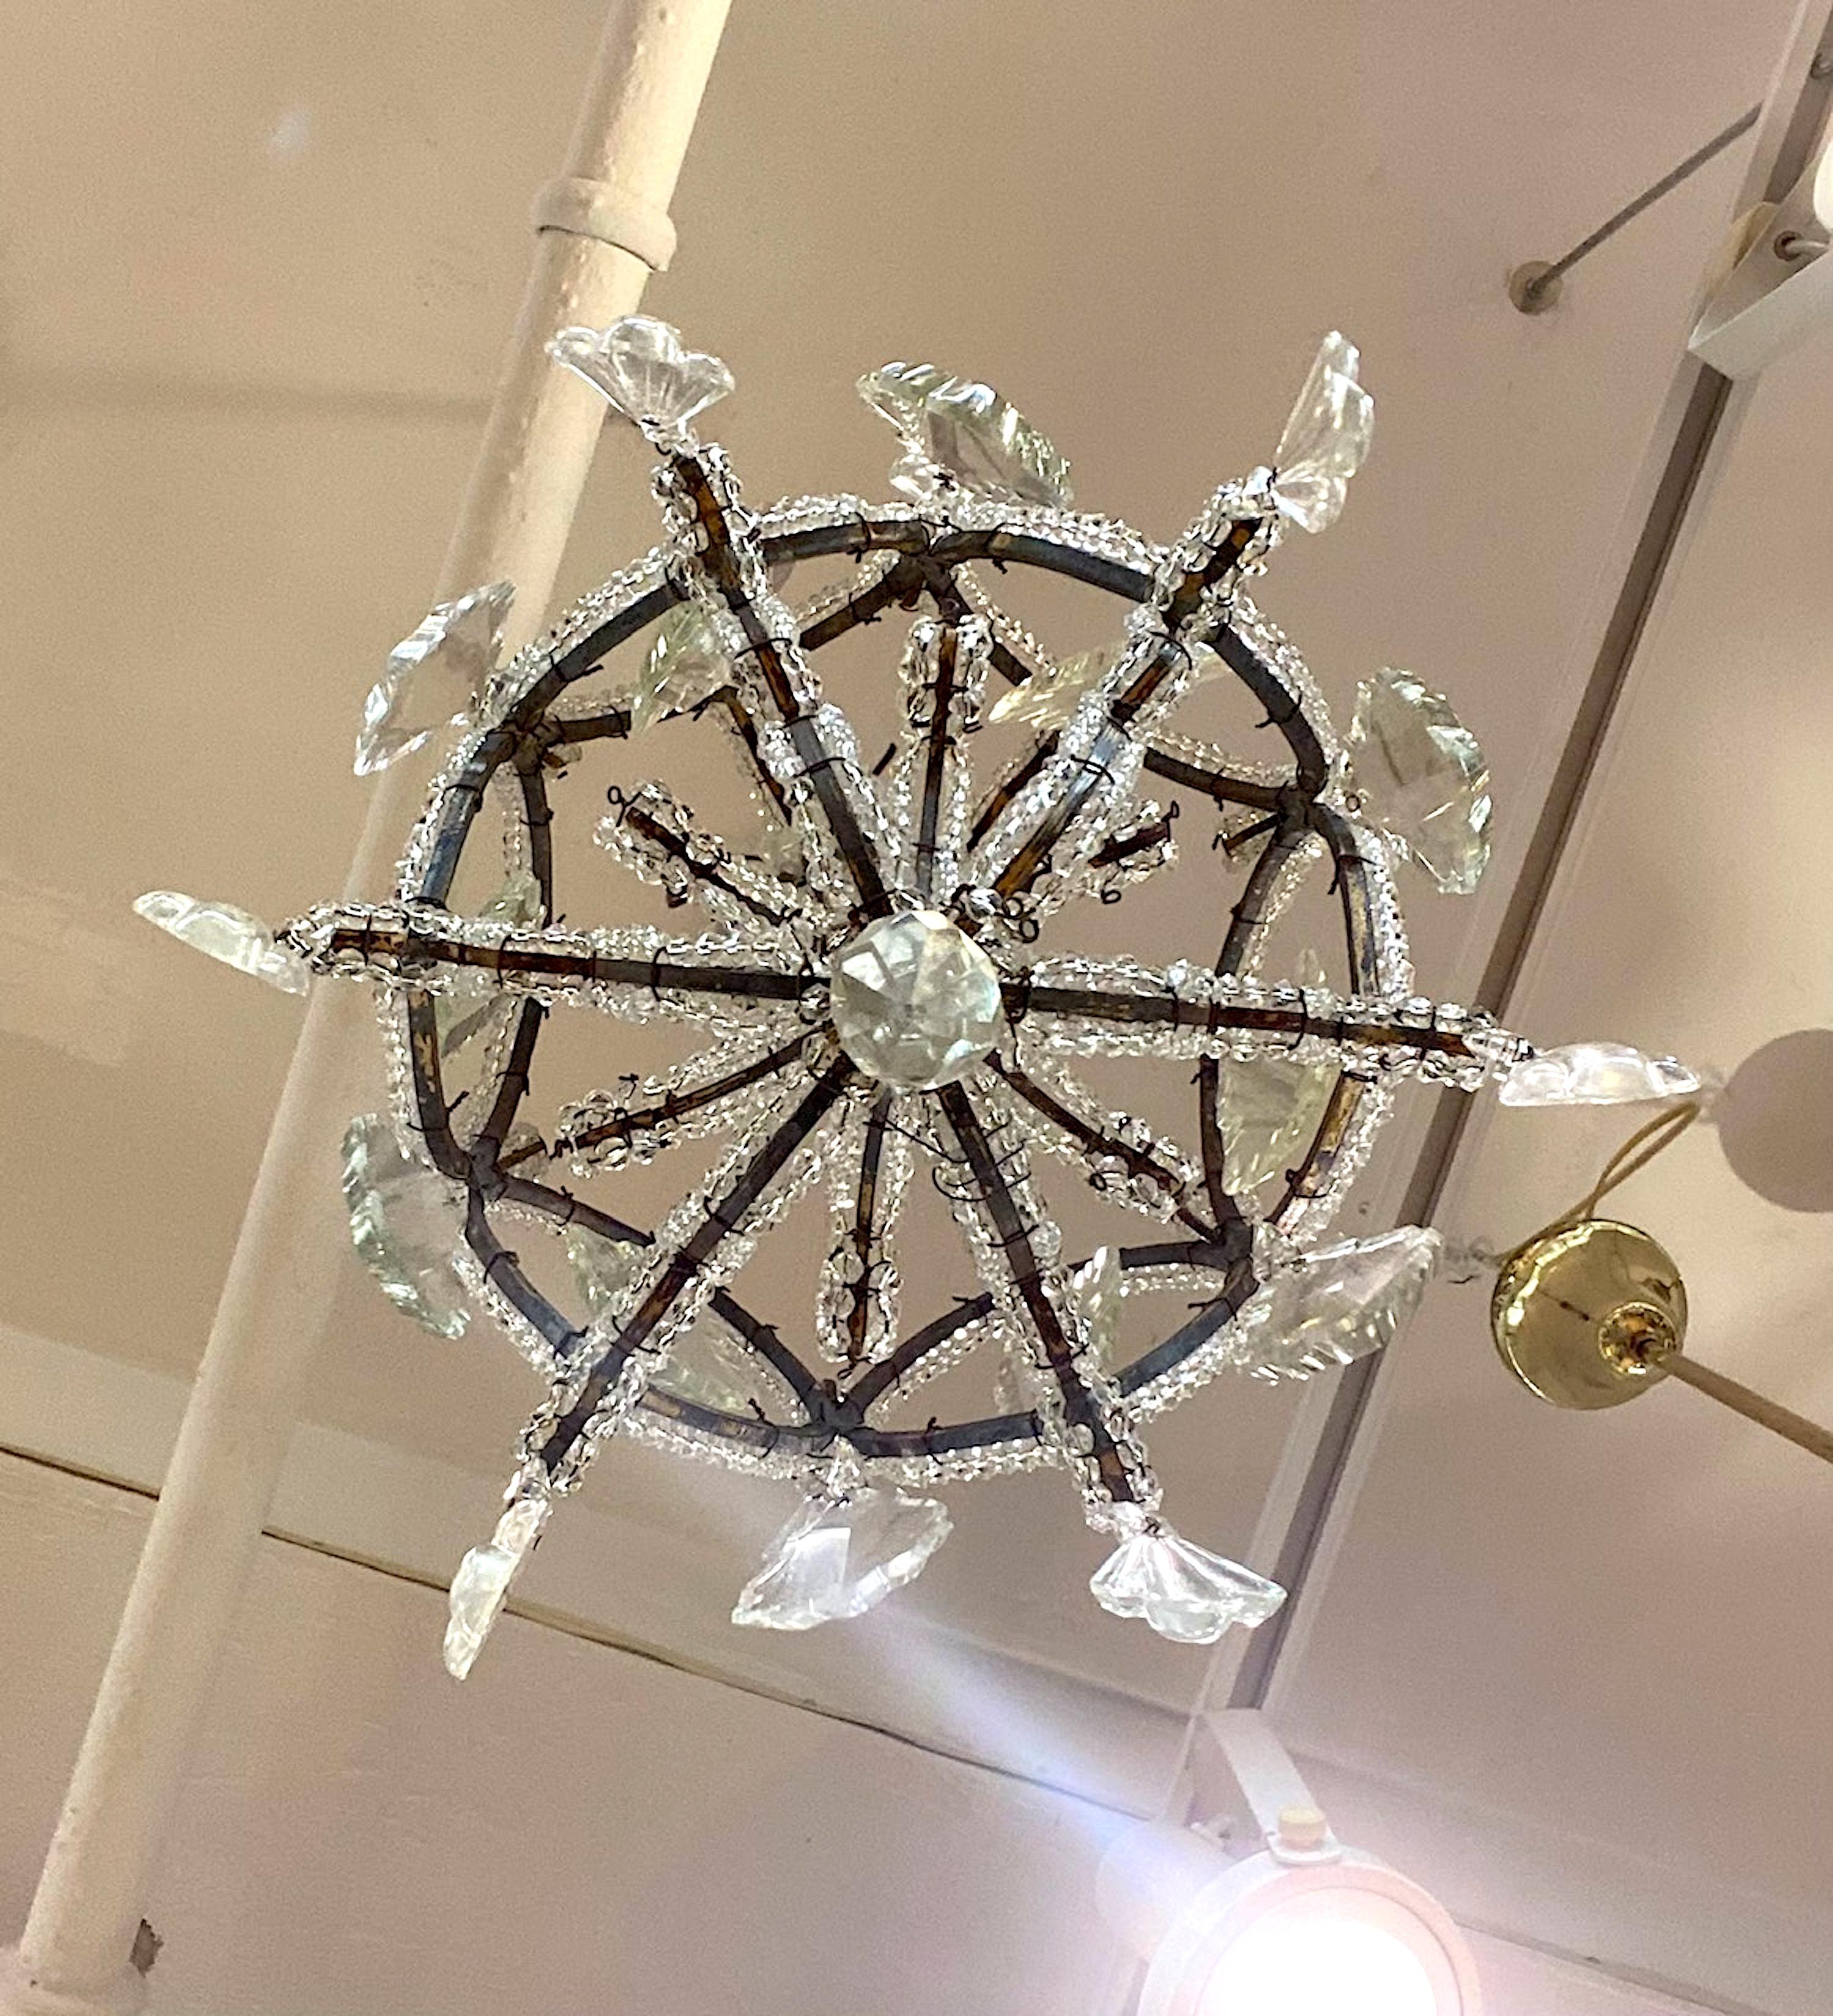 A lovely 1950s Italian pendant light perfect for an entry, powder room, hallway or walk in closet. The frame is iron with distressed gold finish and wired with faceted crystal beads. Additionally there are cut crystal pendants and prism hanging for